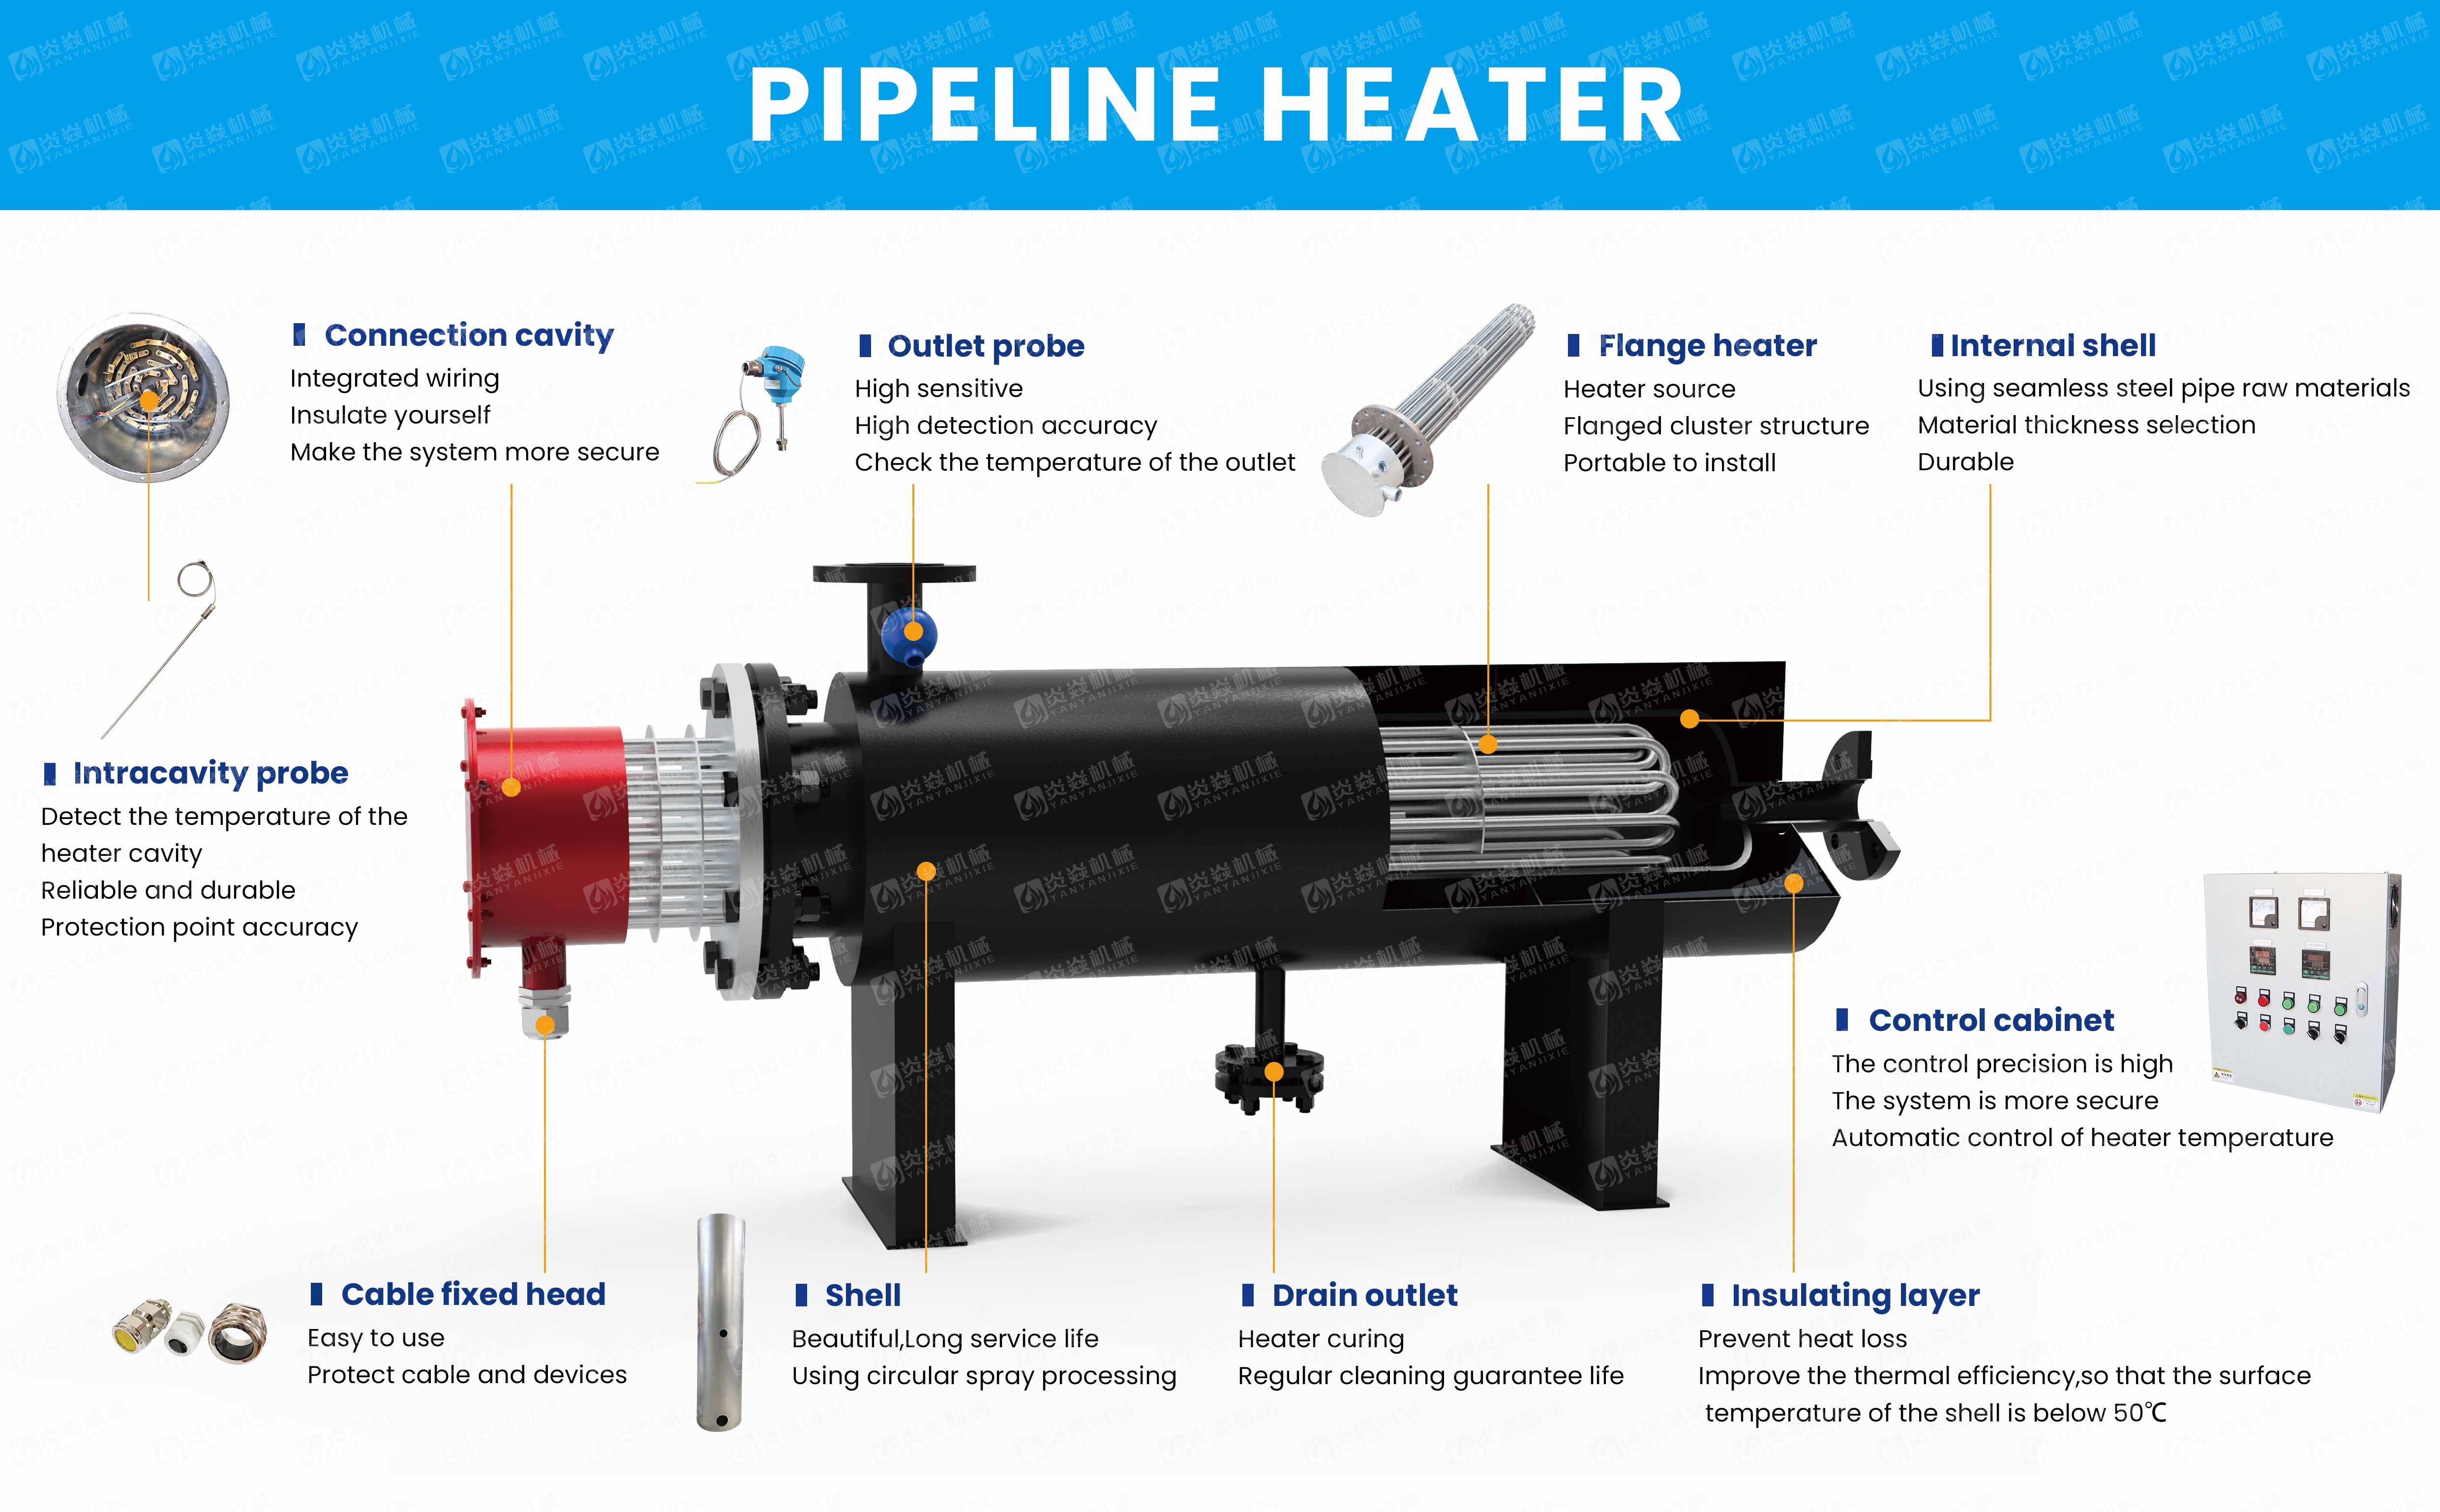 Piping heater detail drawing